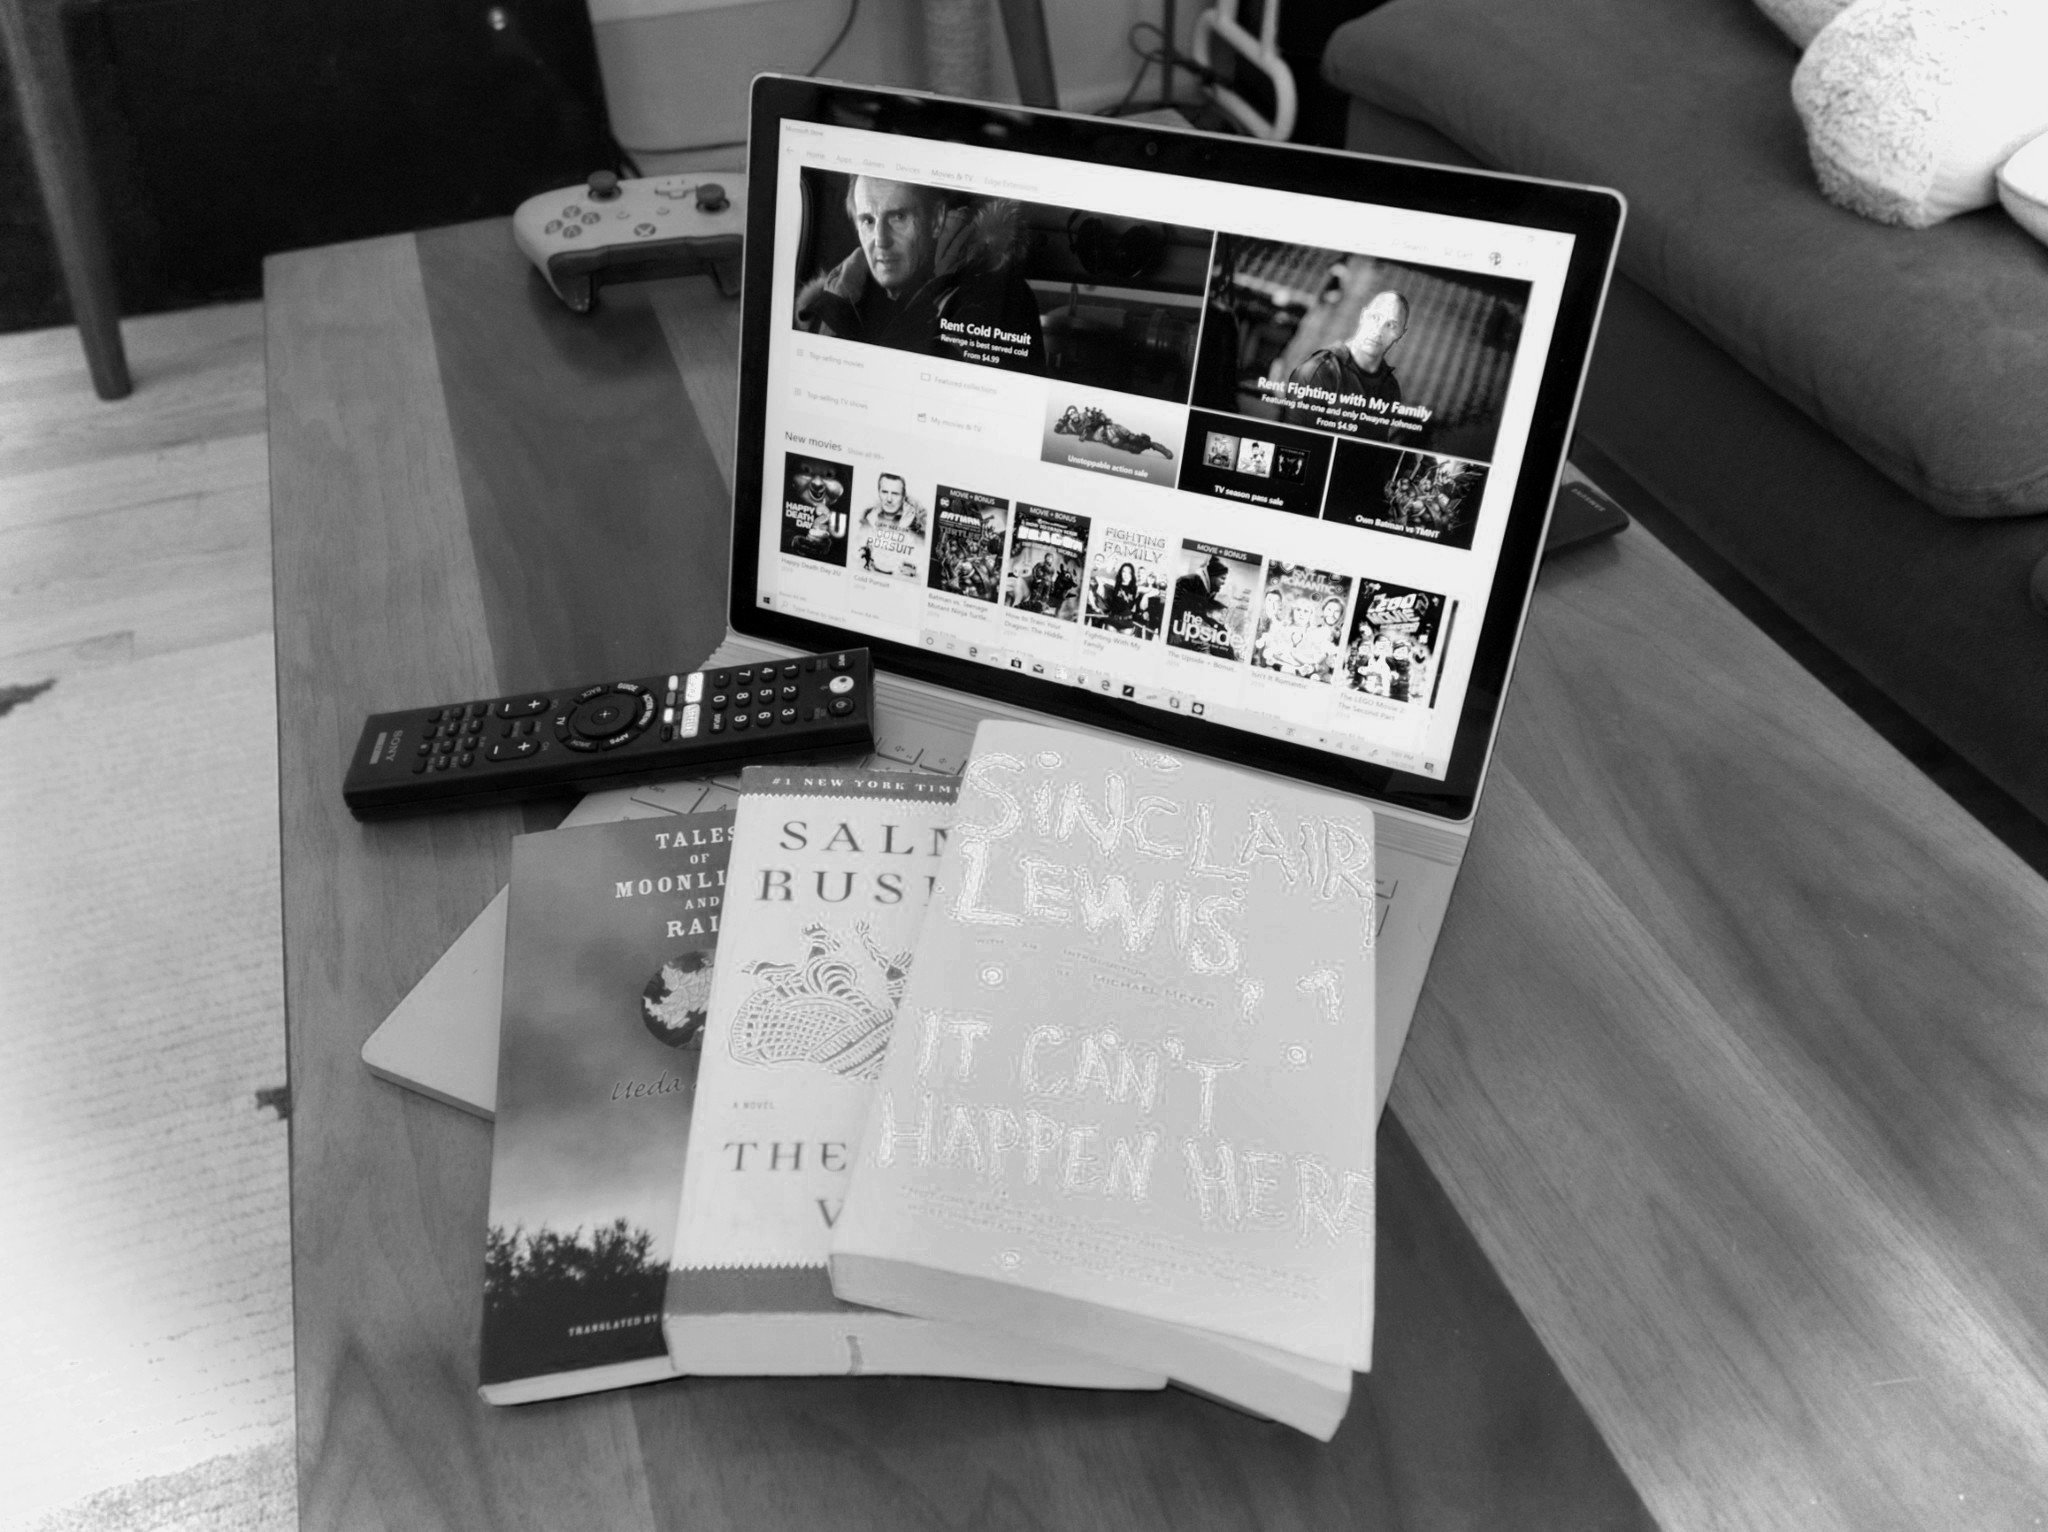 Books and Surface Book